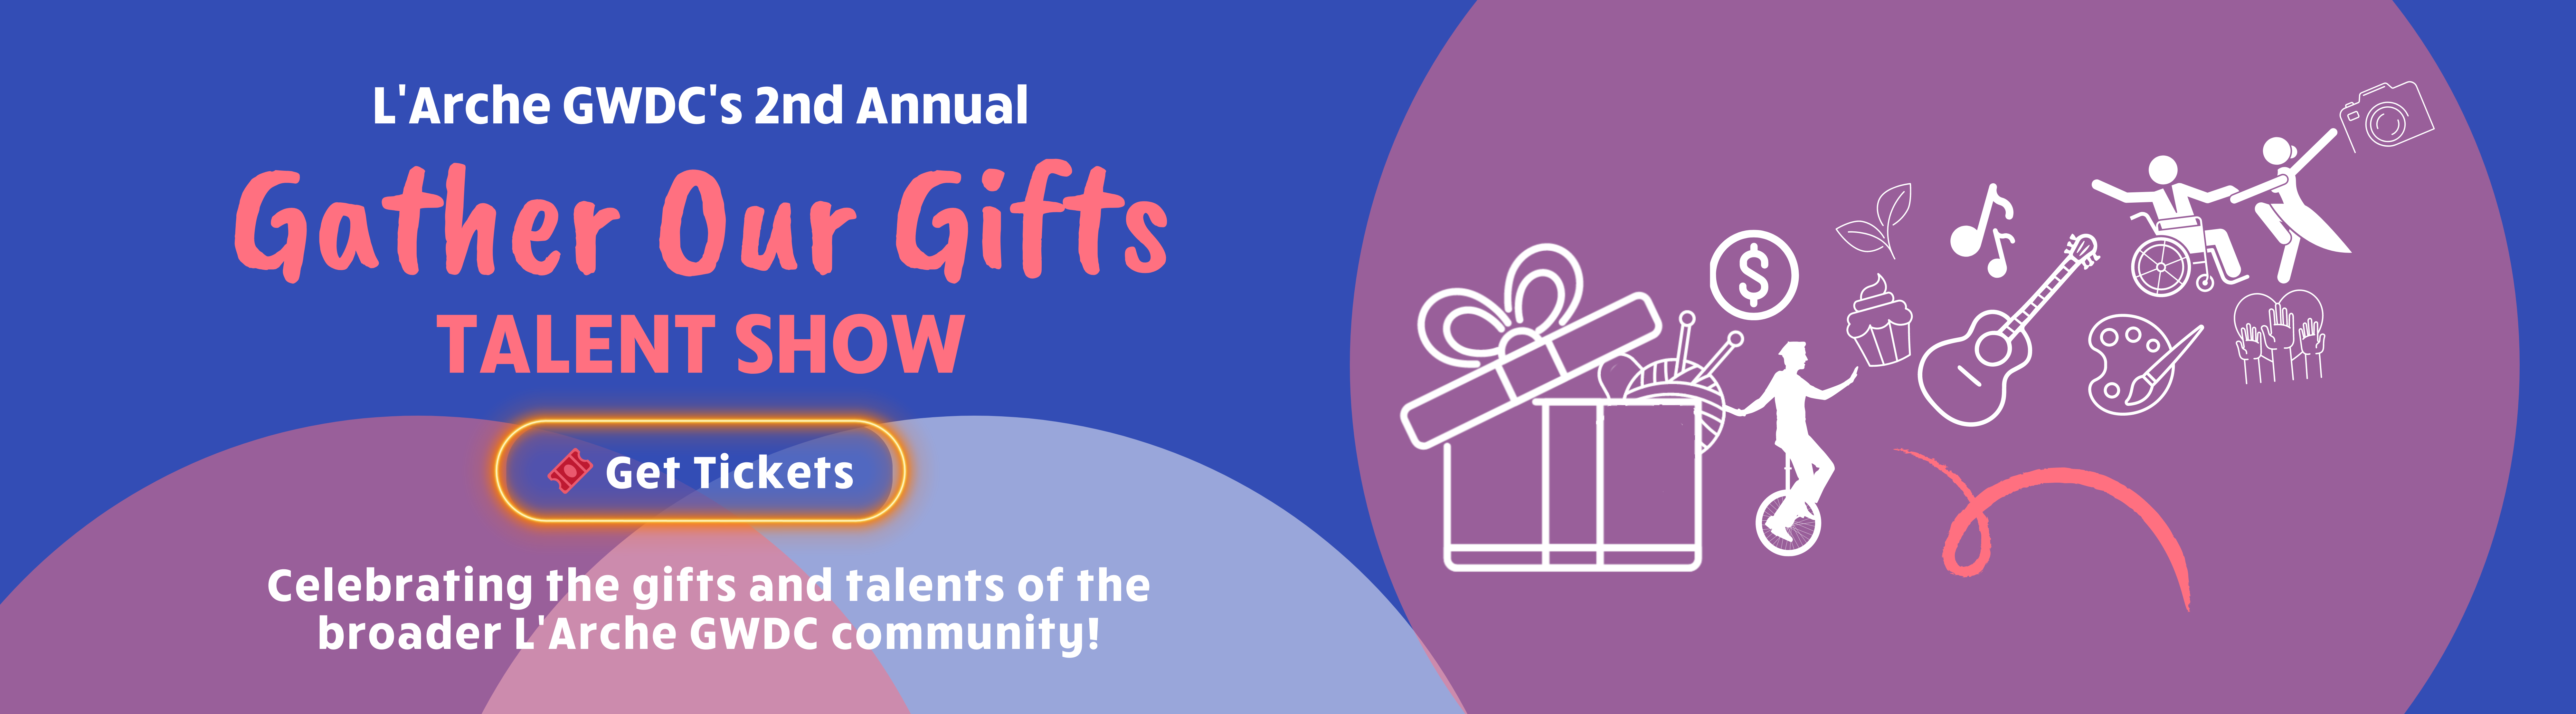 L'Arche GWDC's 2nd Annual "Gather Our Gifts" Friendraiser and Fundraiser. Celebrating the gifts and talents of the broader L'Arche GWDC community! Click the banner to get tickets.